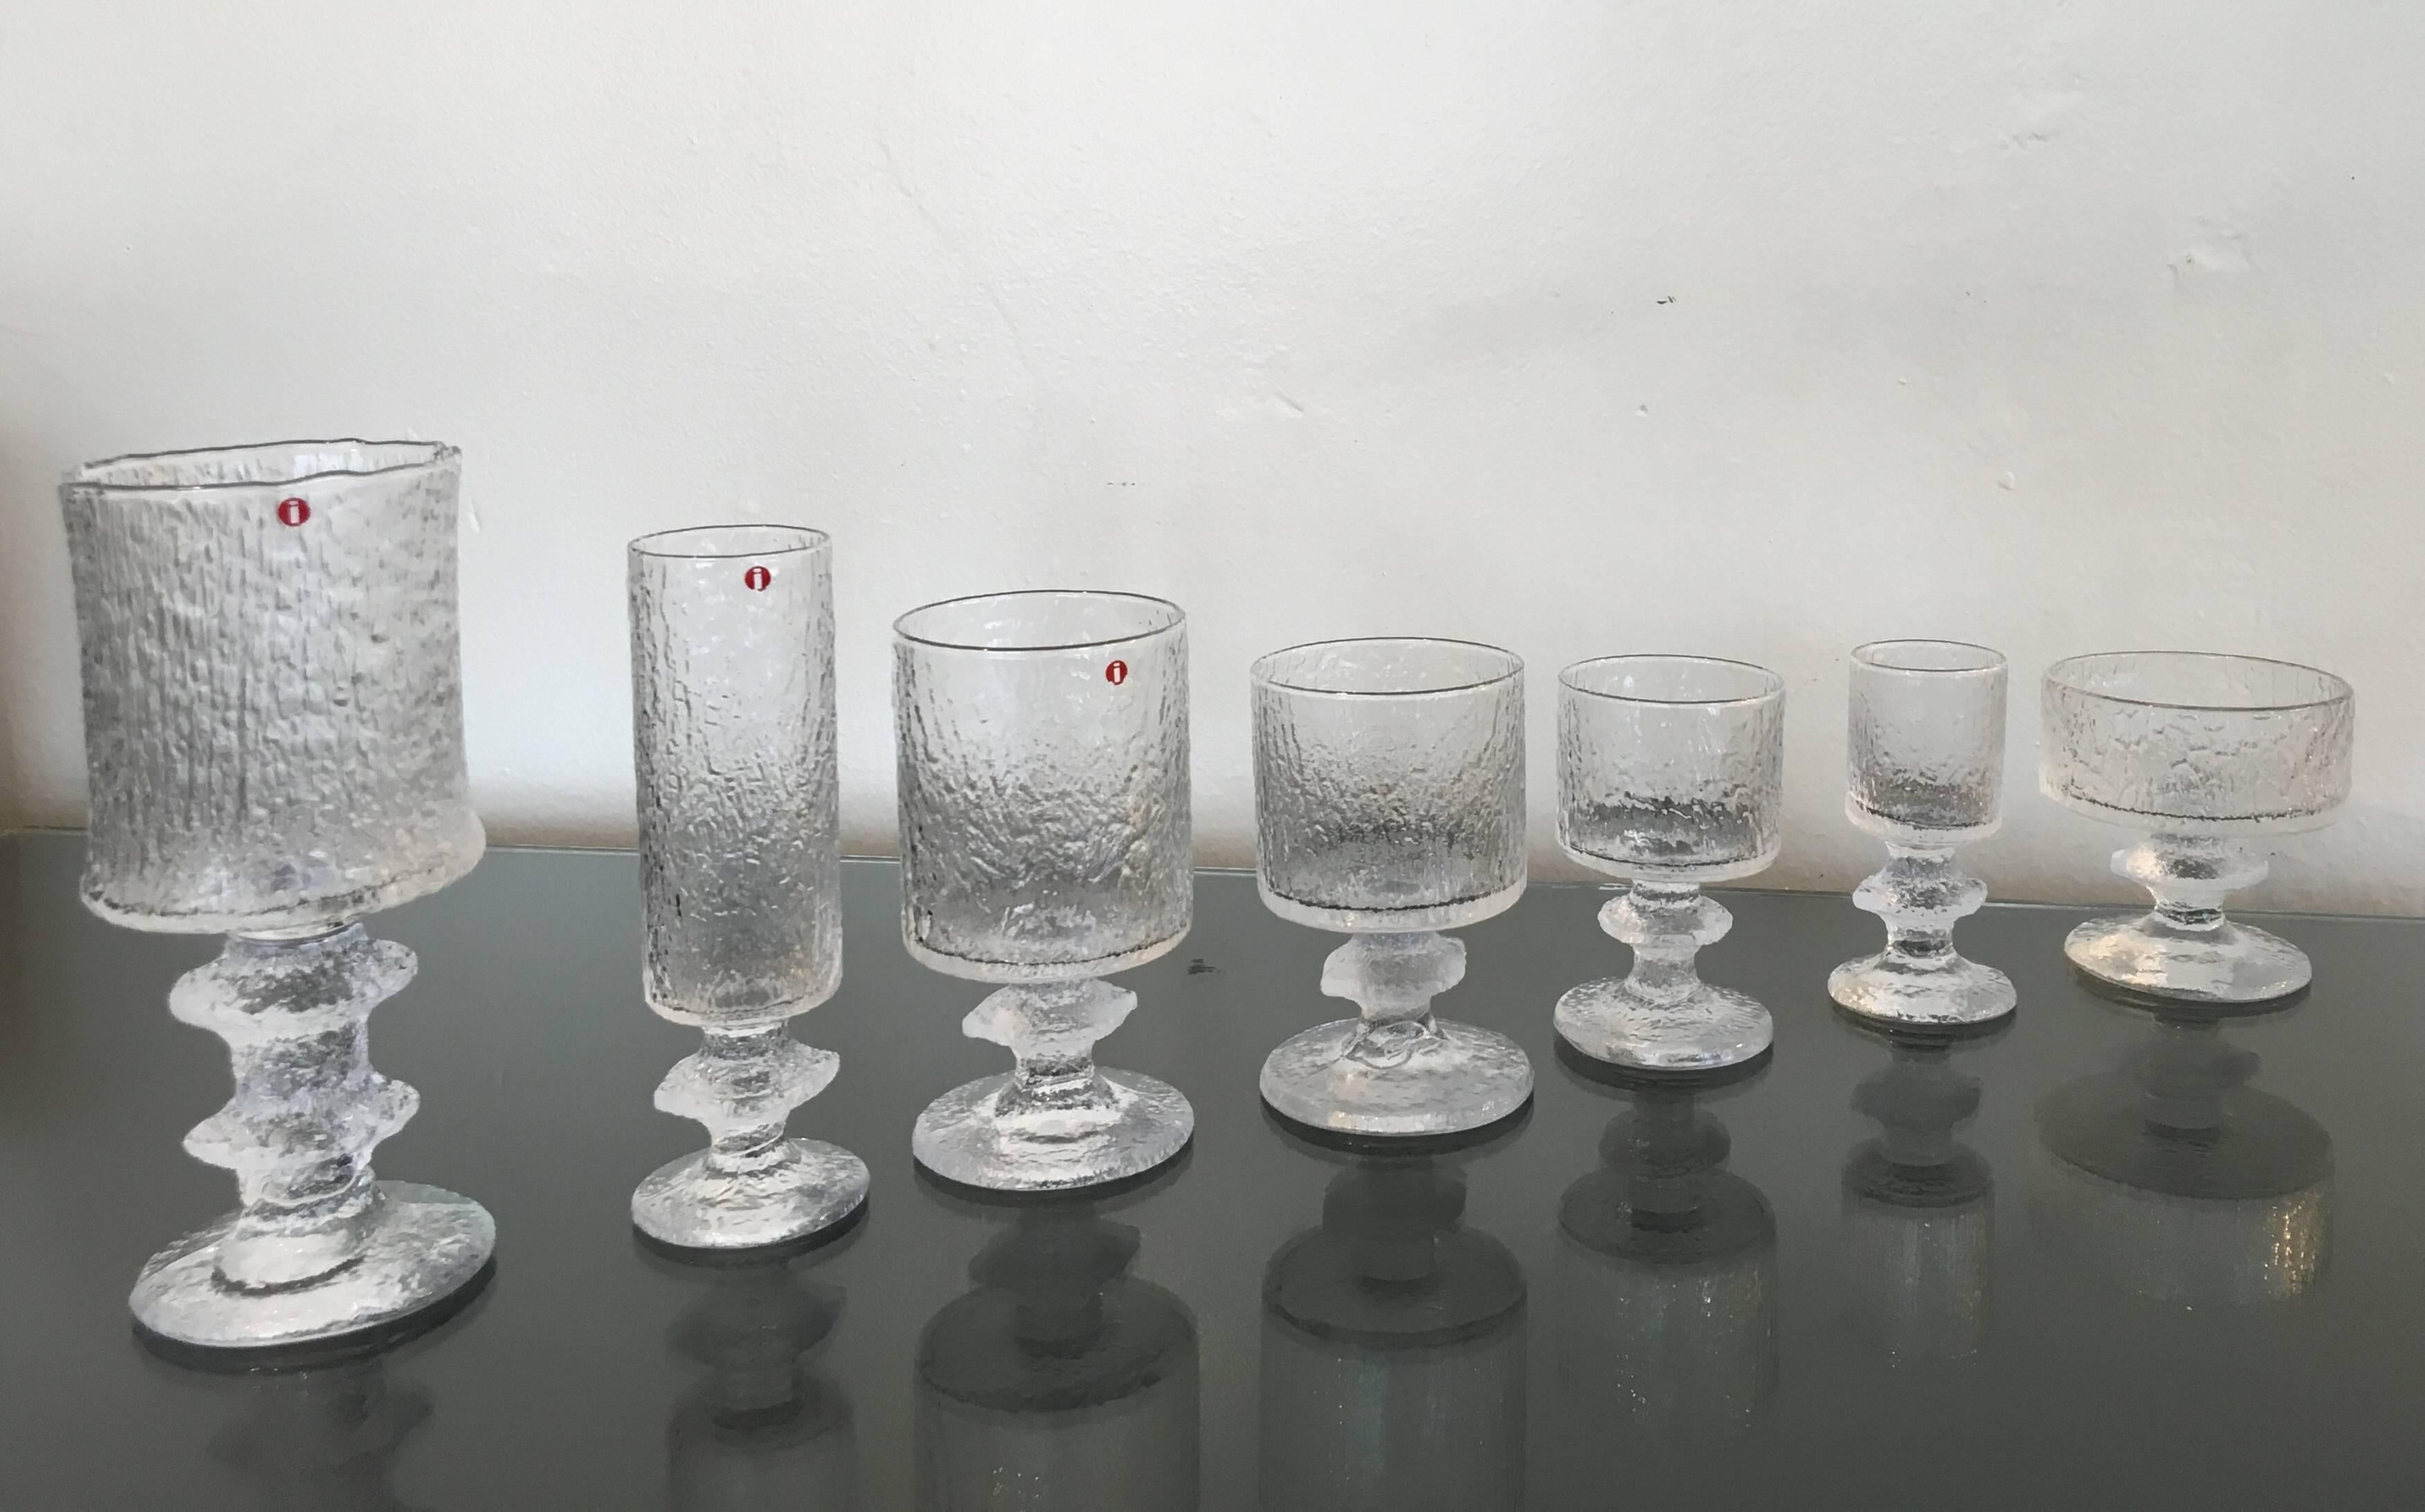 A very glamorous service for eight drink set by Timo Sarpaneva for Iittala.
It's very rare to find a hole set together like this. Most of them have Iittala tags or marked TS. 
The tallest is 7 7/8 high 3 3/8 diameter.
The smallest one is 4 3/8 high